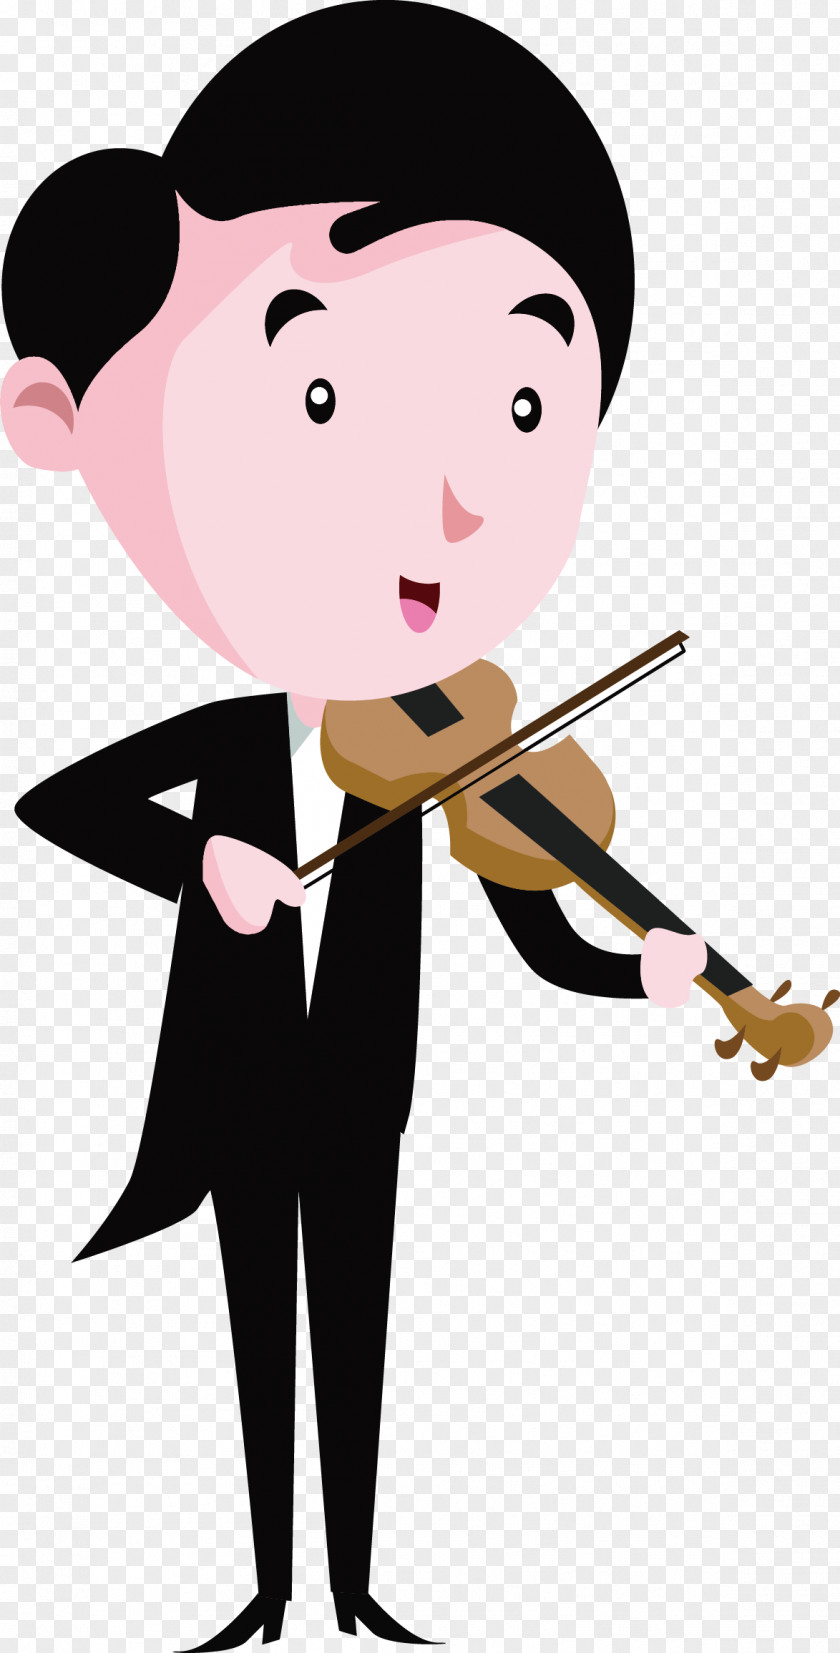 The Gentleman Of Violin Technique Musical Instrument PNG